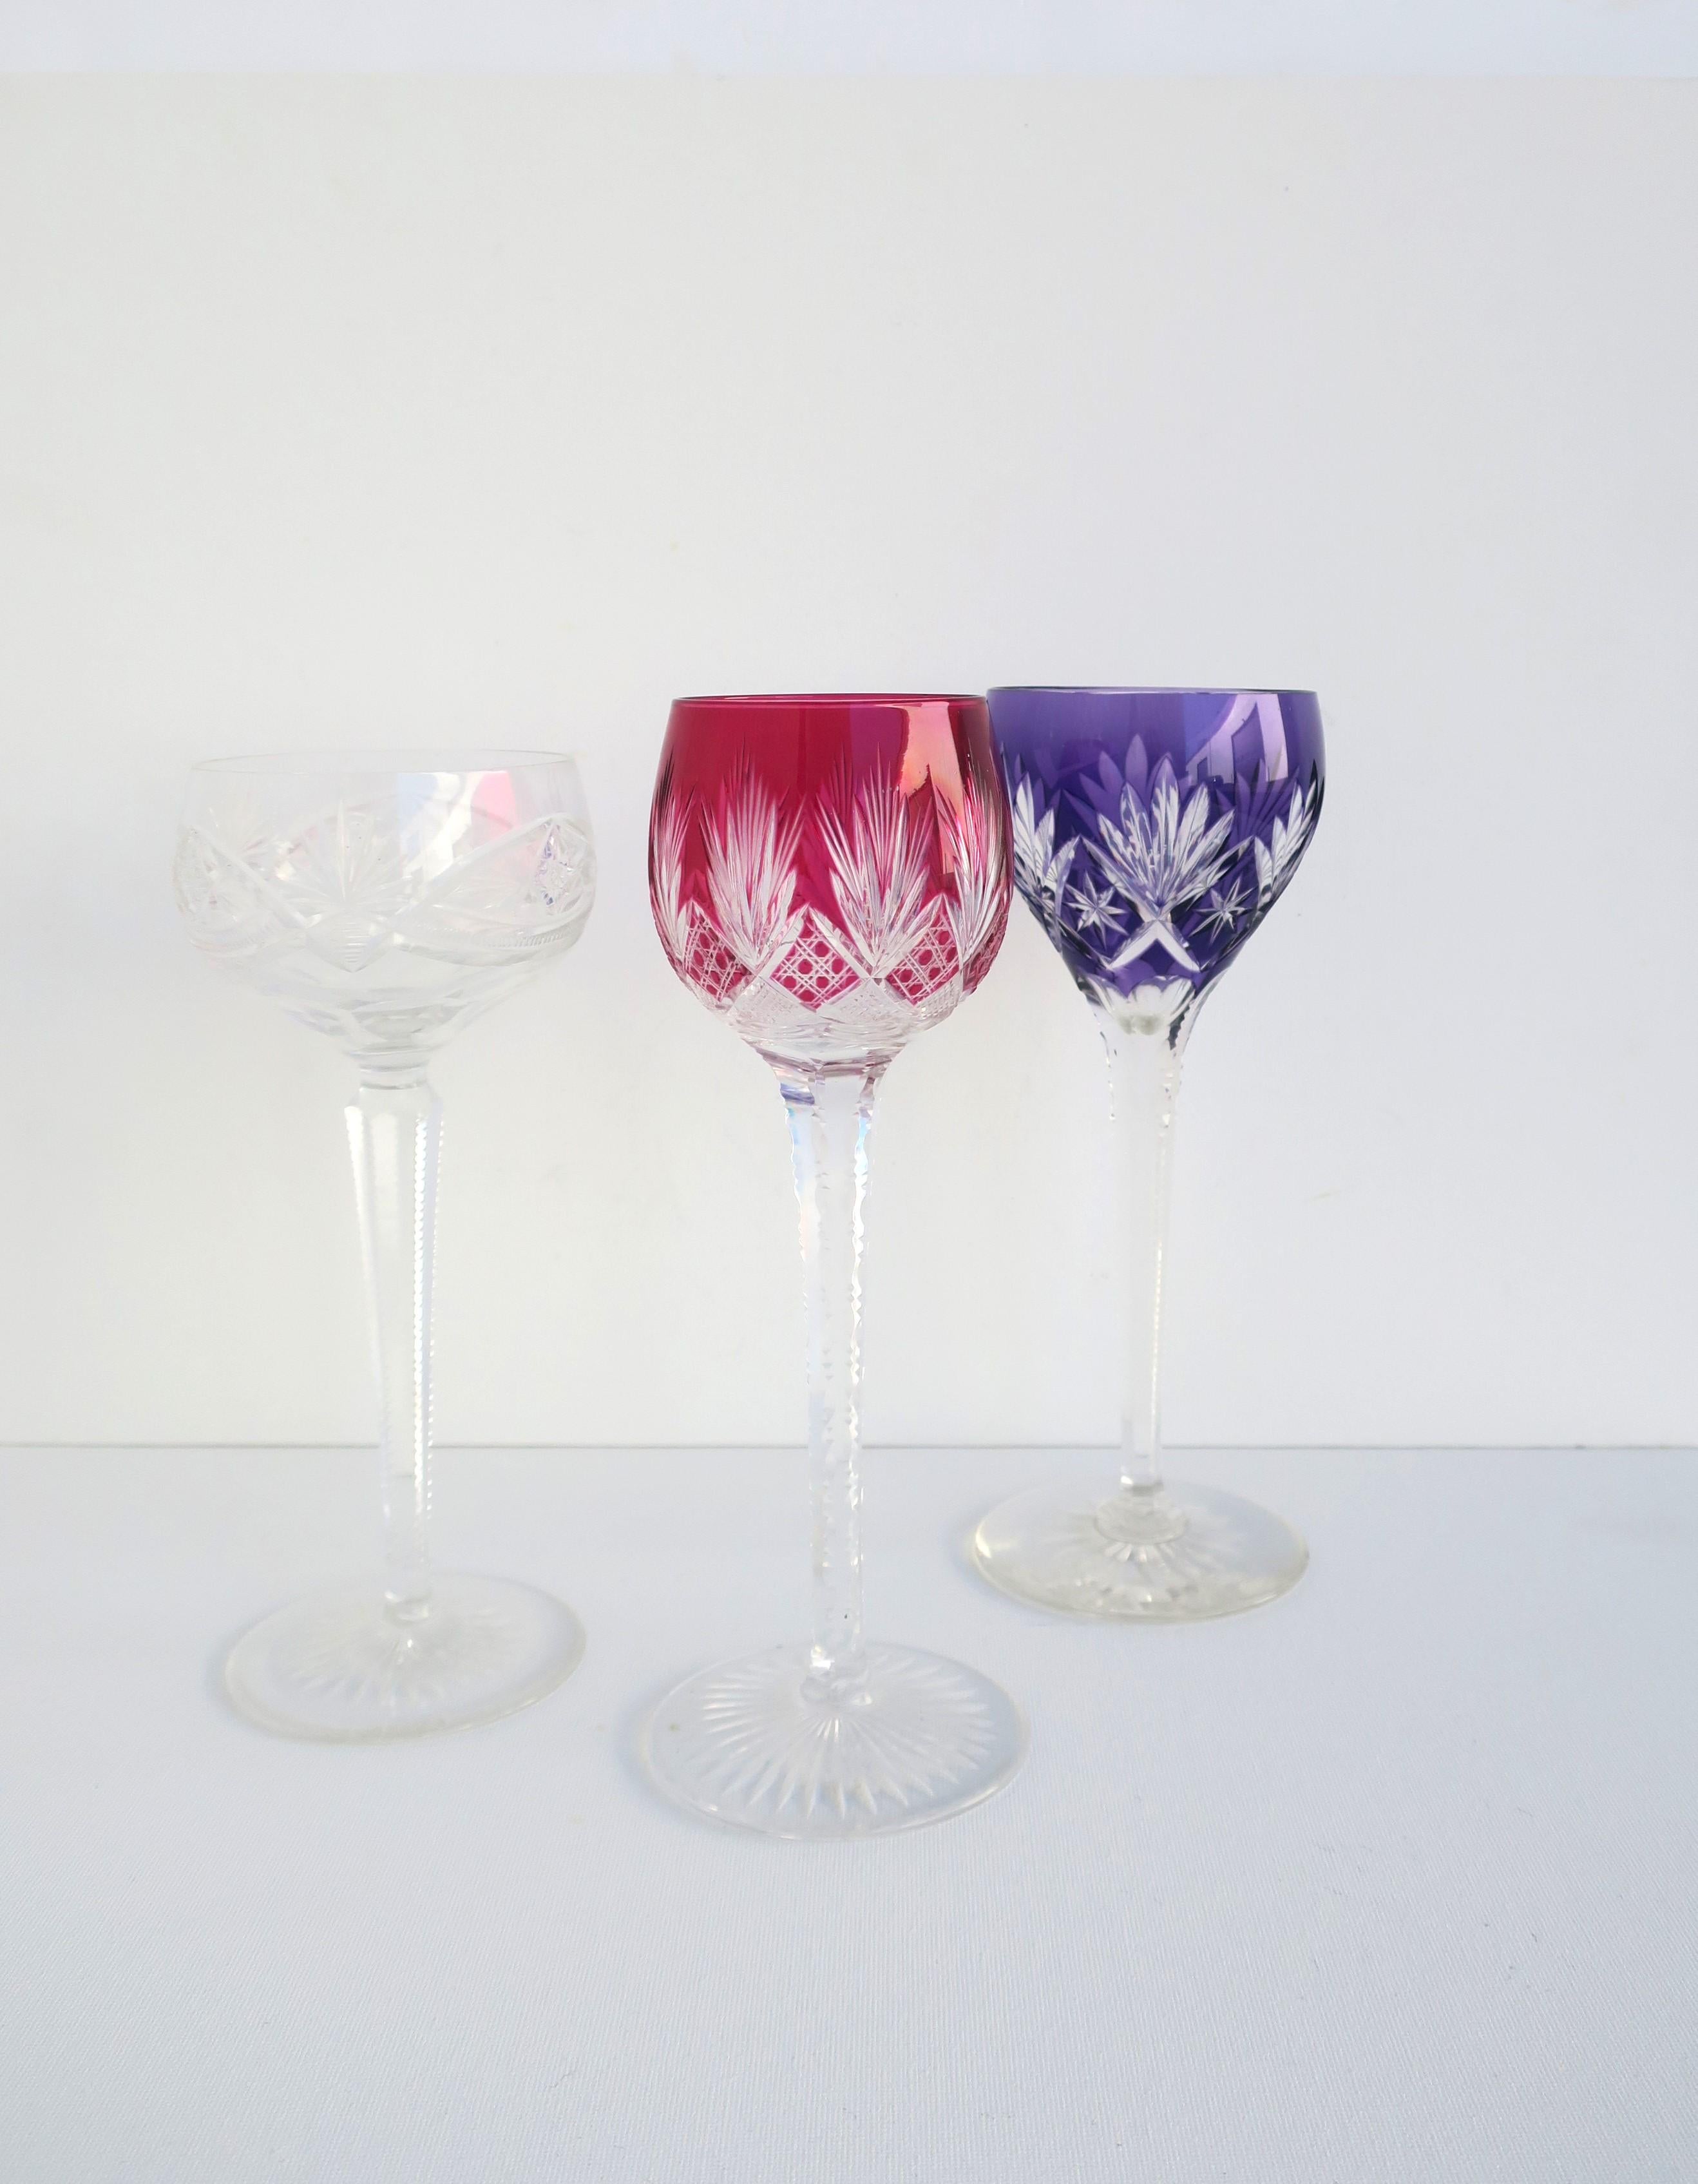 Euro Czech Colorful Cut to Clear Wine or Cocktail Glasses, Set of 3 In Good Condition For Sale In New York, NY